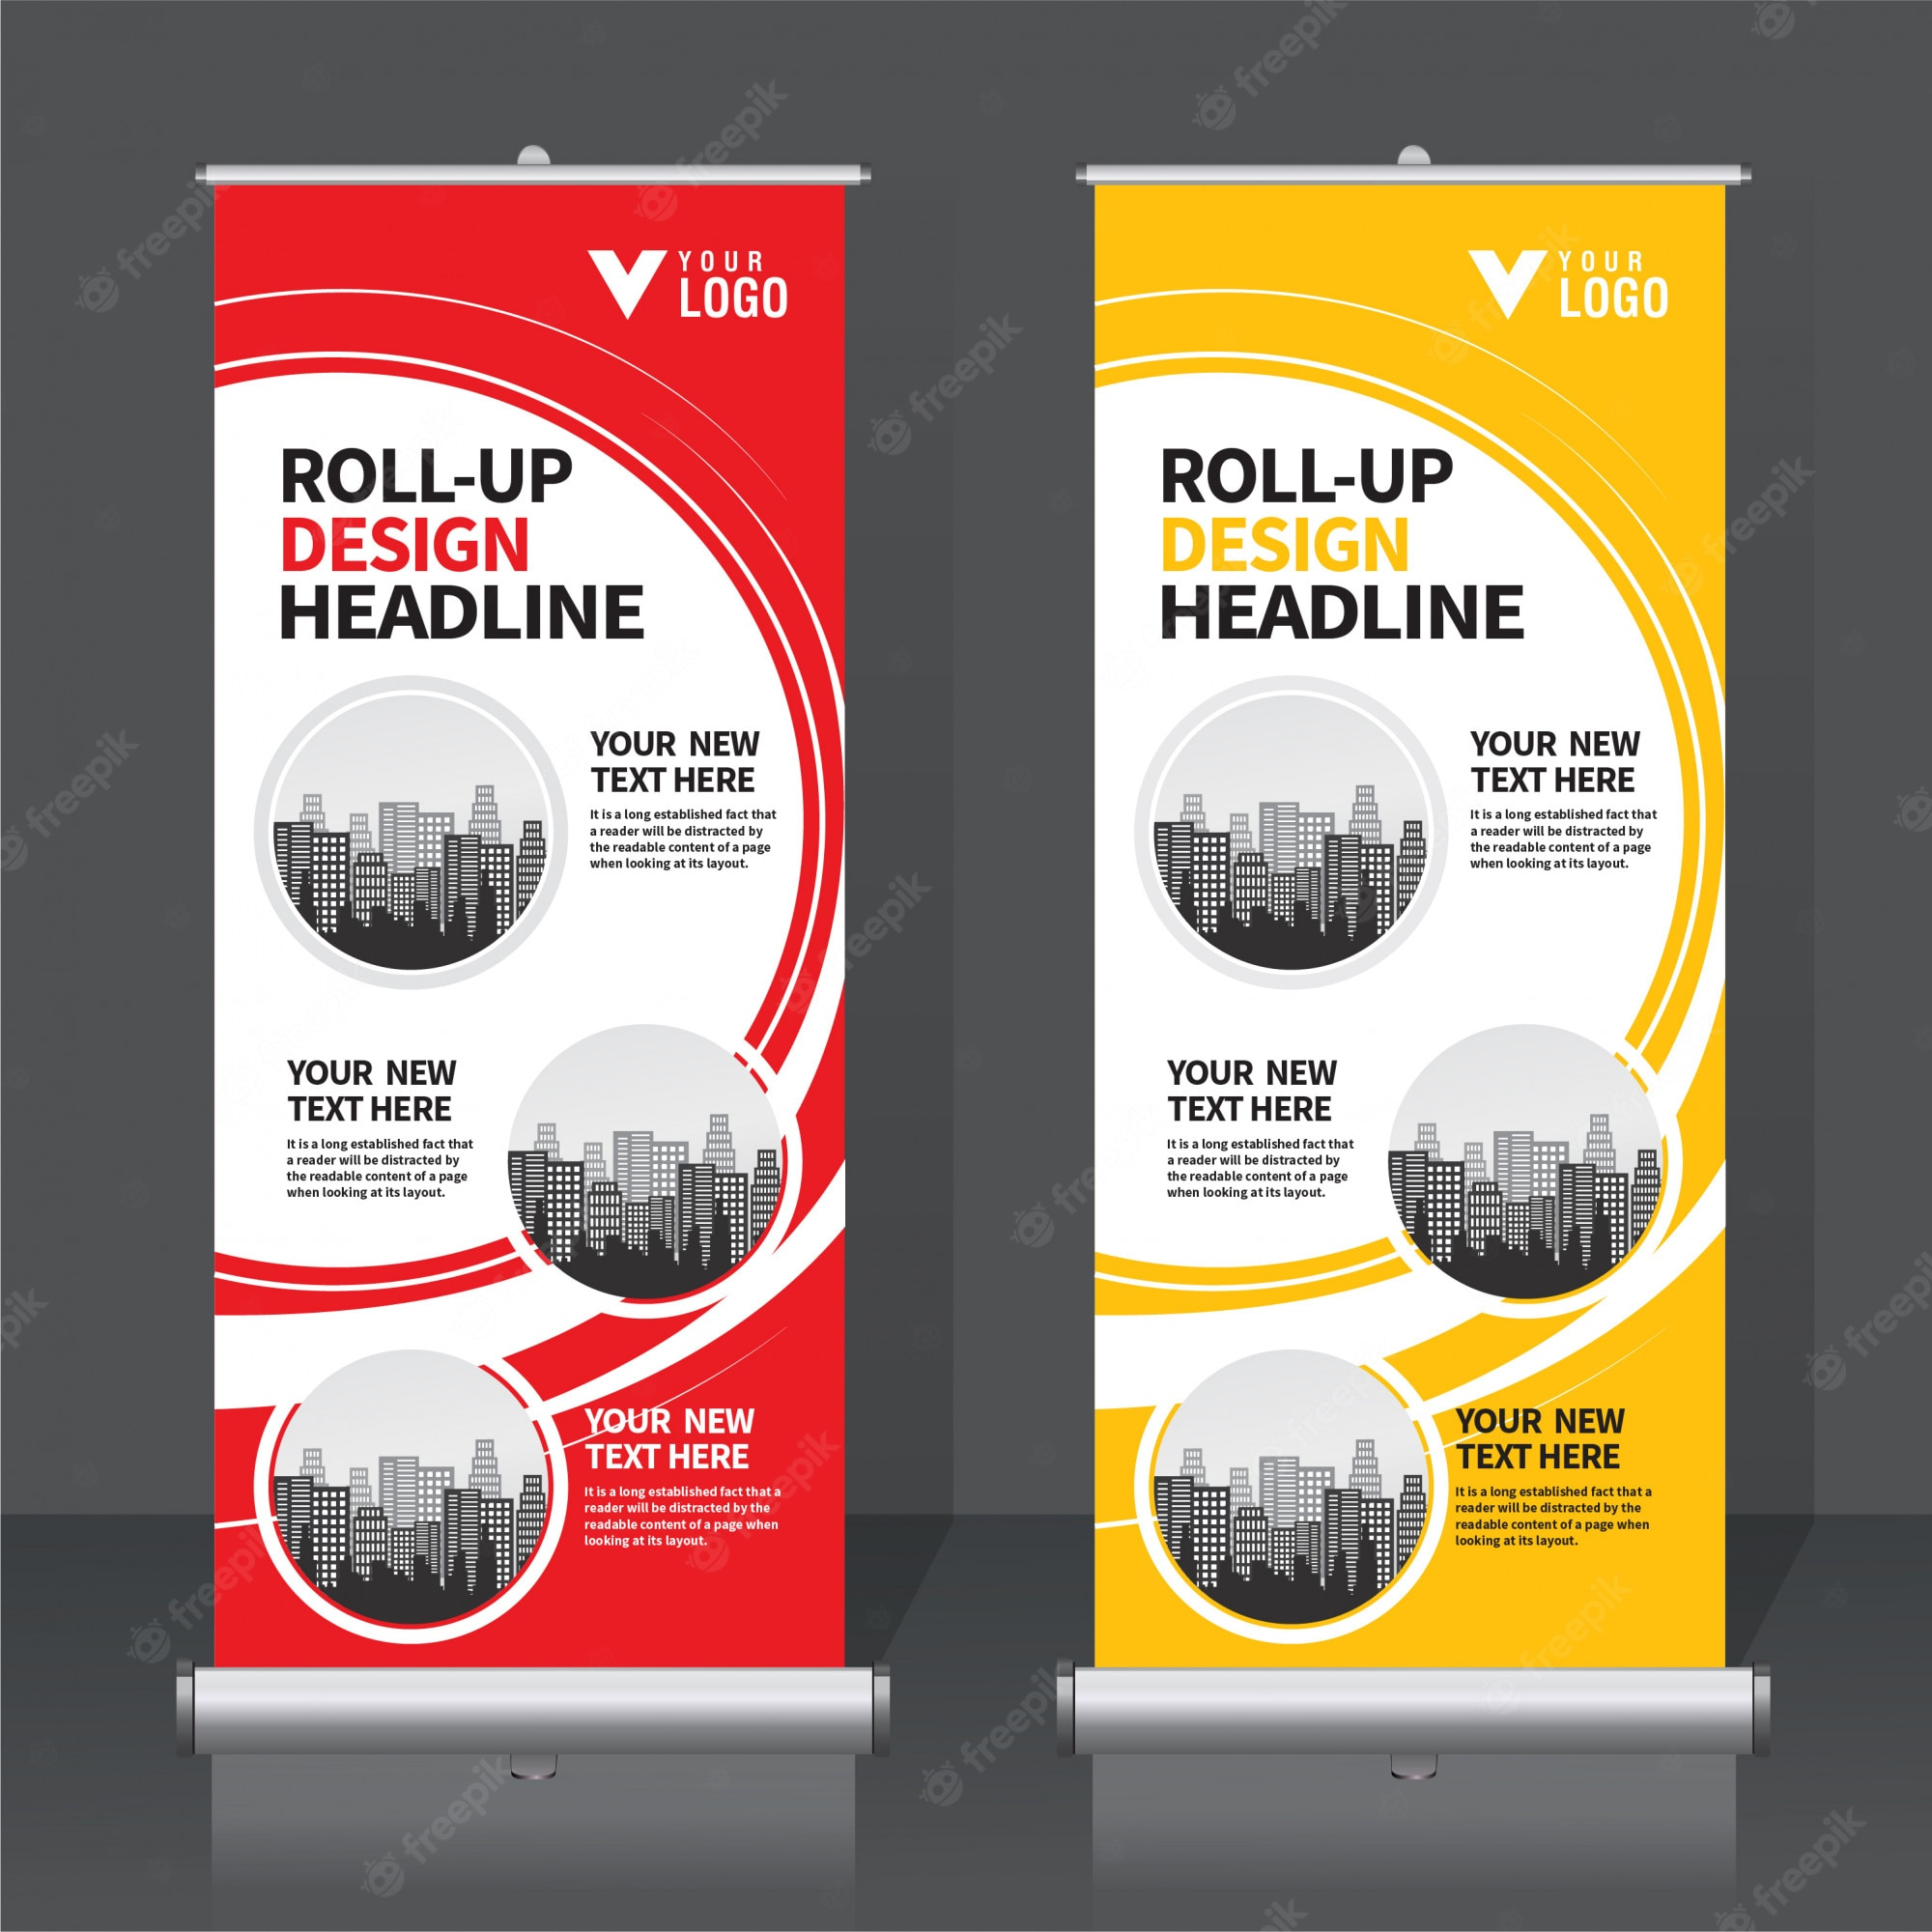 Pull Up Banners Vectors & Illustrations For Free Download  Freepik For Pop Up Banner Design Template